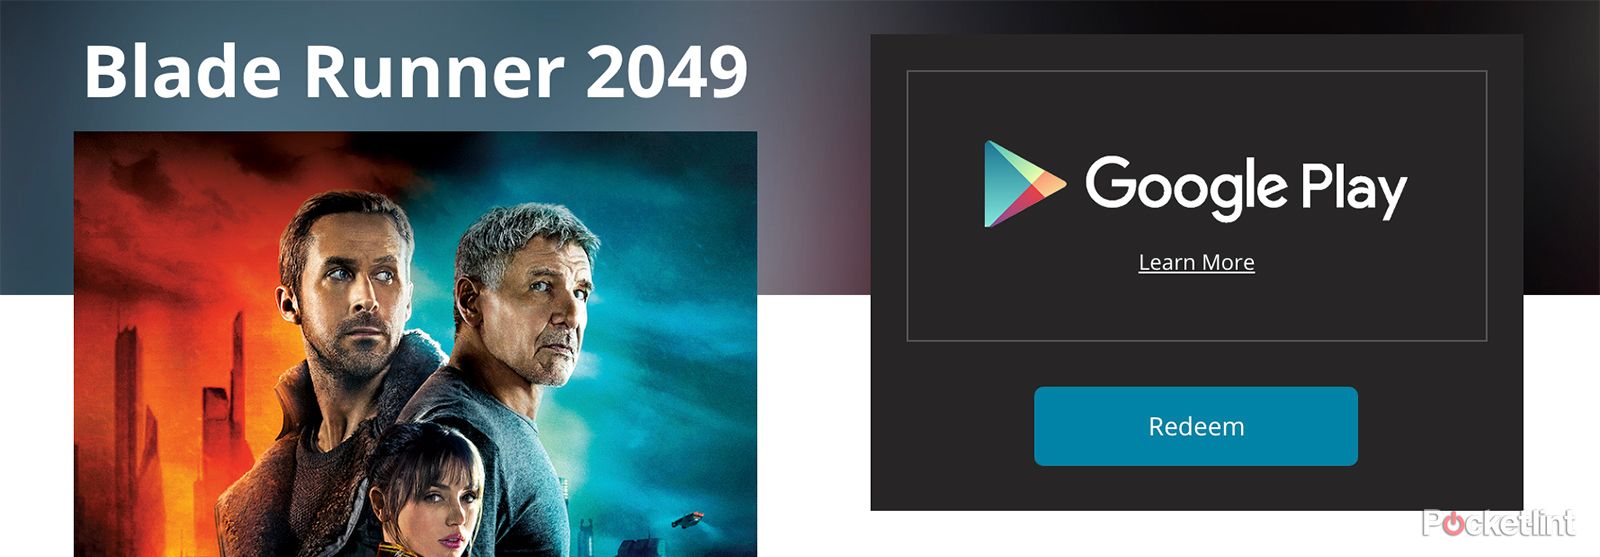 You Can Now Migrate Your Ultraviolet Flixster Movie Collection To Google Play Heres How image 4